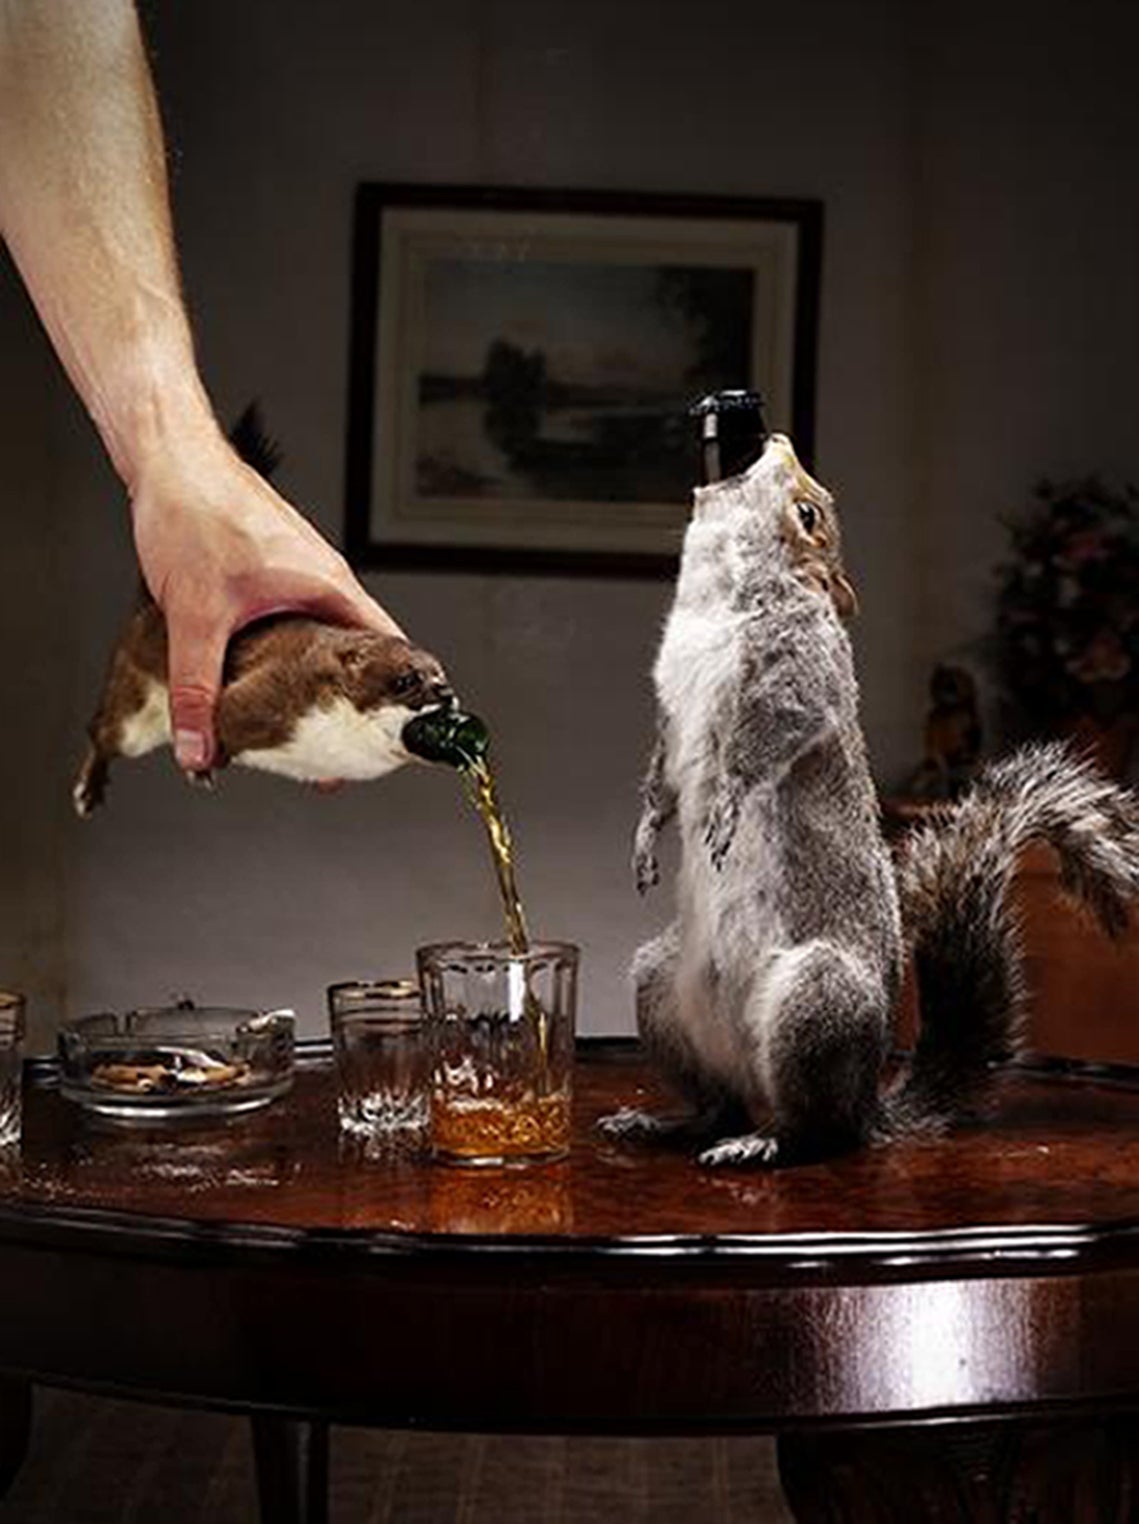 BrewDog’s unveiling of a beer served out of taxidermy animals ruffled some feathers with its 55 per cent strength and £500 price tag and... well, its delivery